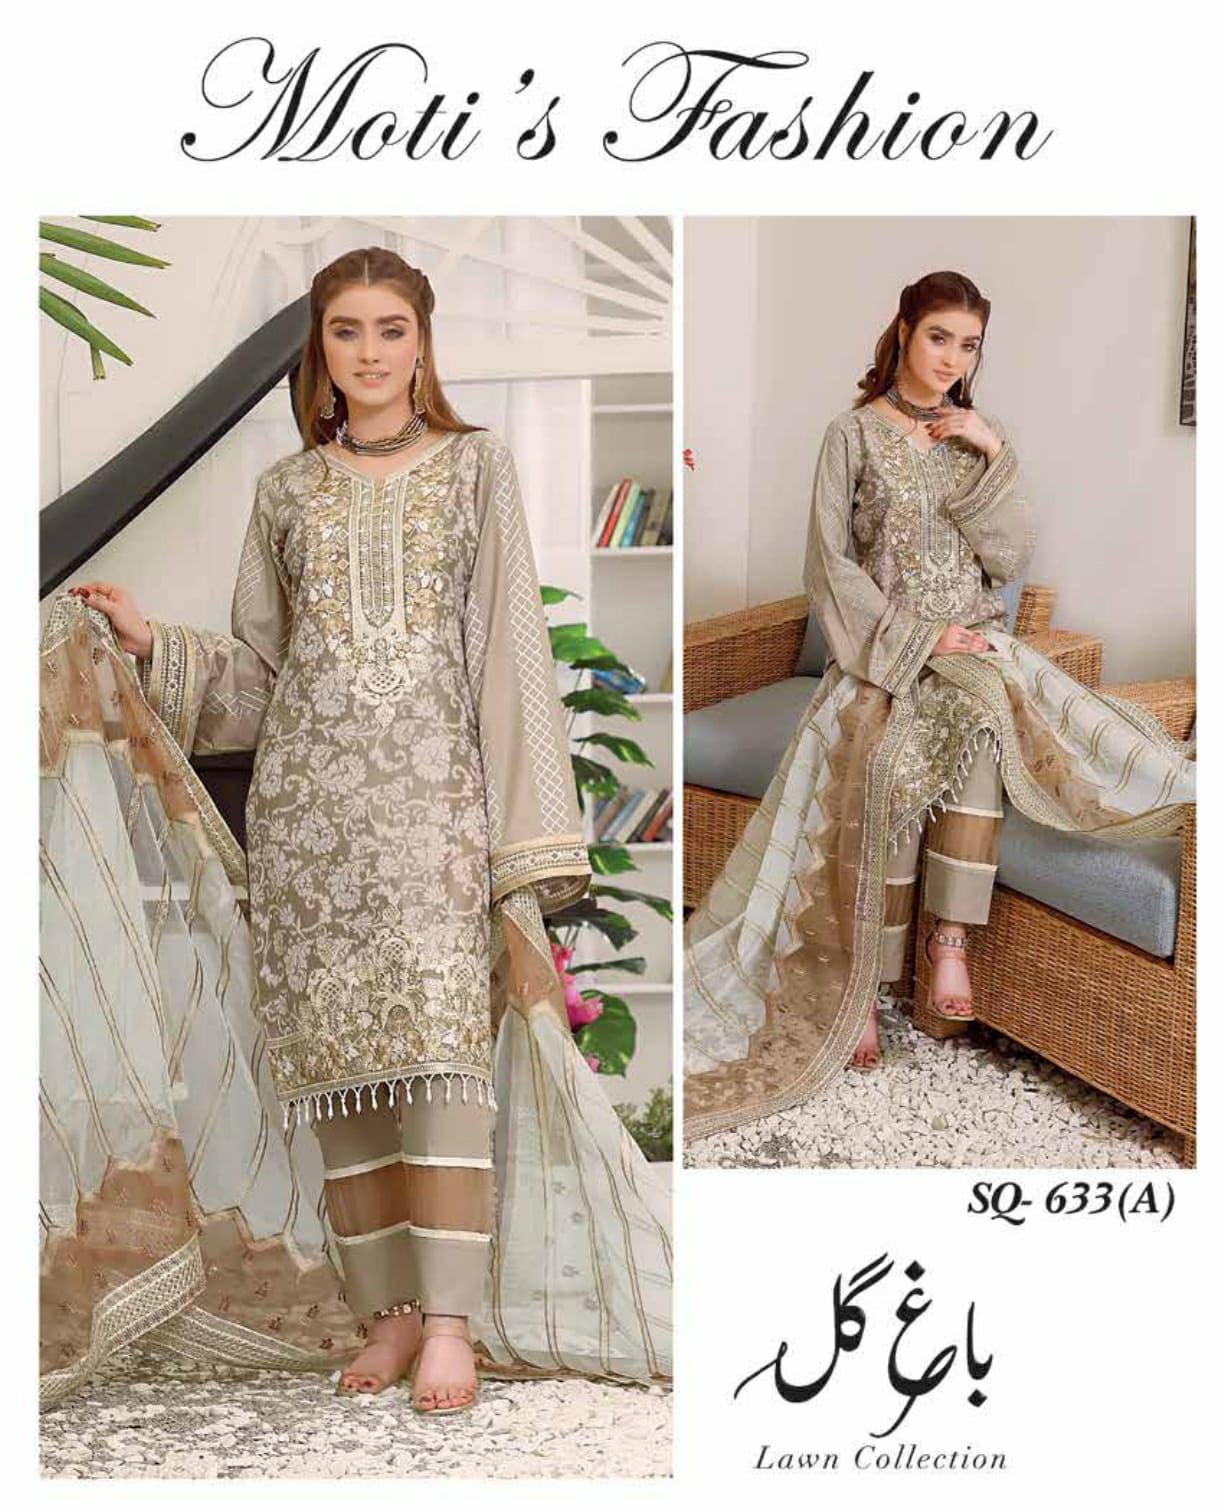 Motis Fashion Bagh E Gul Lawn Collection Semi Stitched Dress Material Catalog Lowest Price